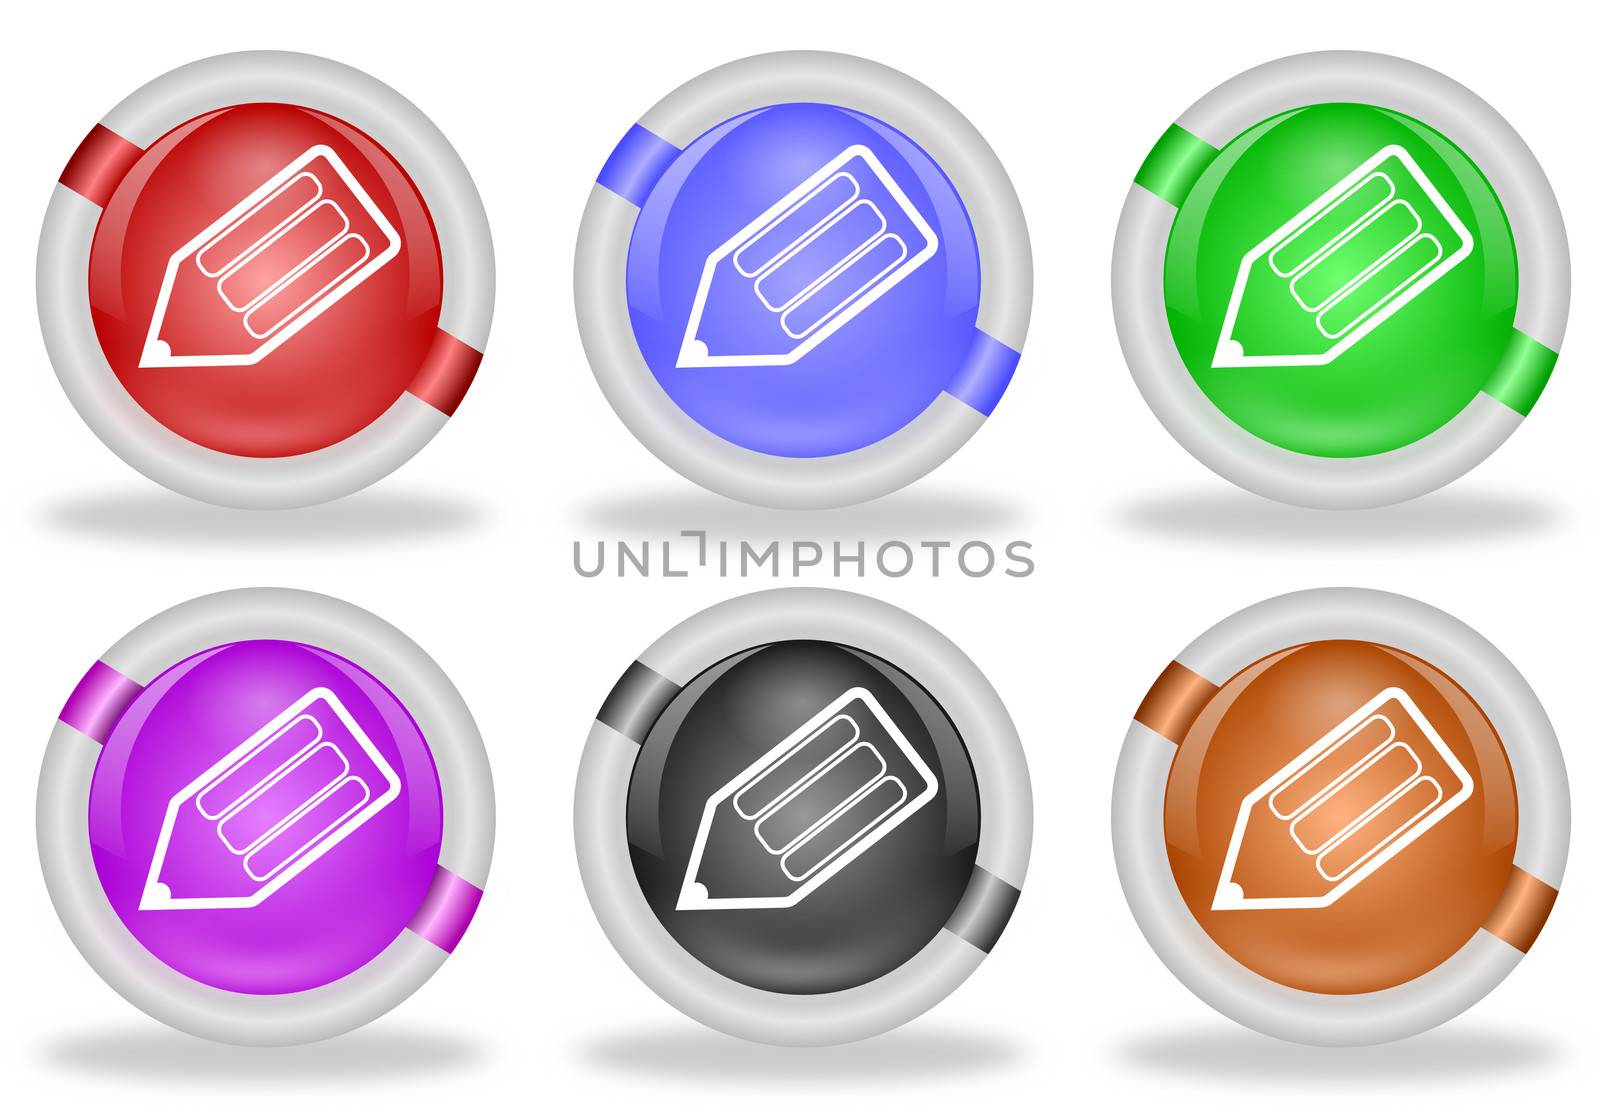 Pencil Write Web Icon Buttons by RichieThakur